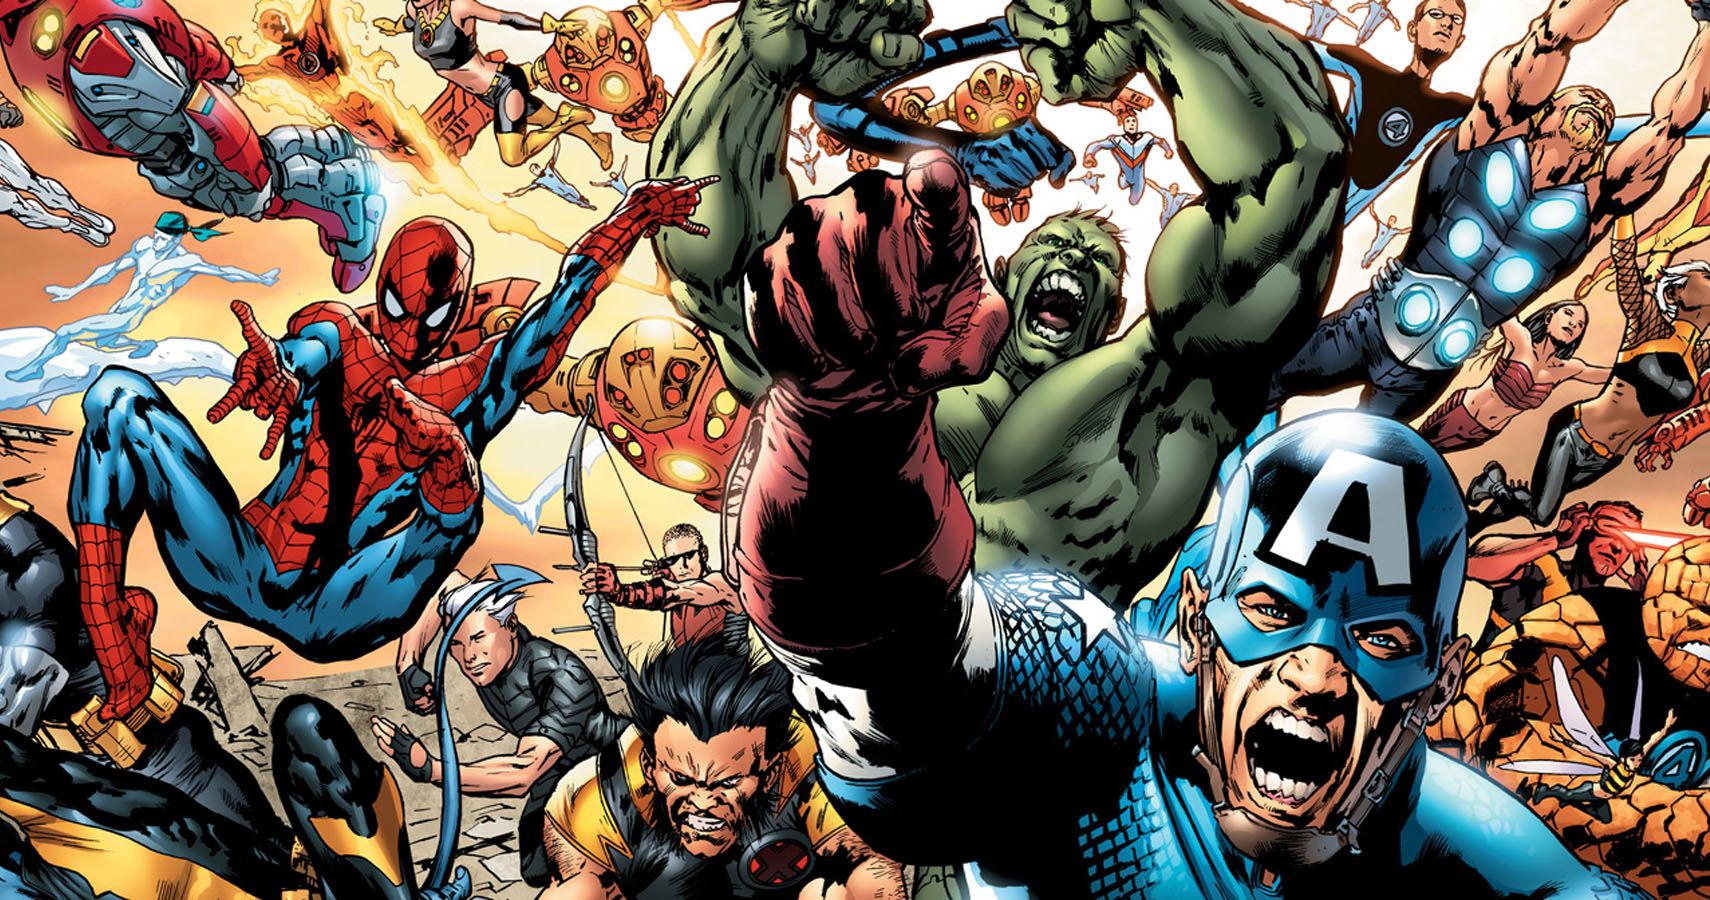 Team shot of the main heroes from the Ultimate Marvel Universe